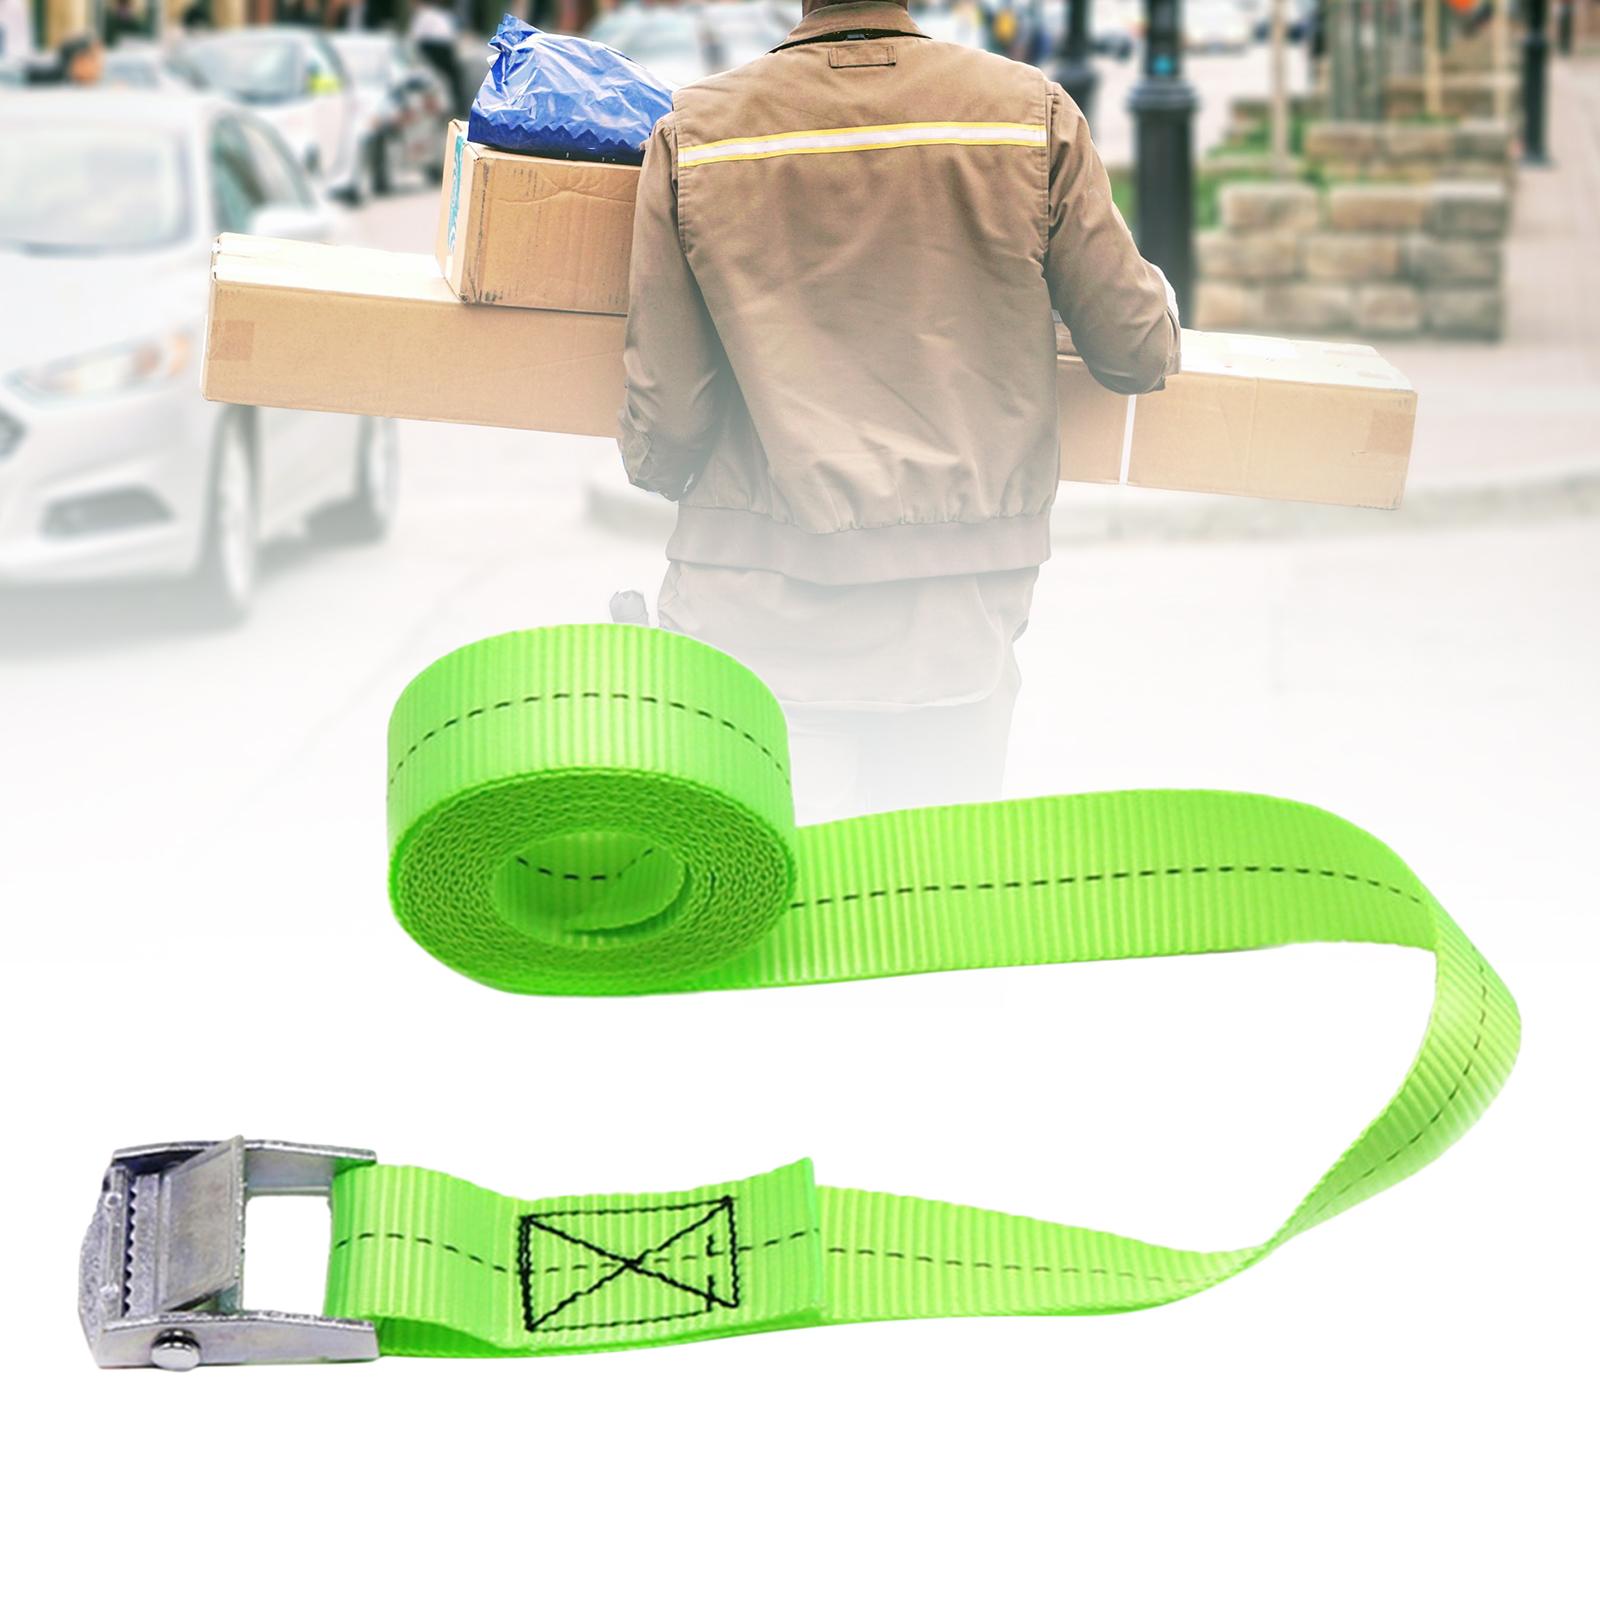 Luggage Strap Travel Luminous Lashing Straps for Traveling Outdoor Trips 236.2inch